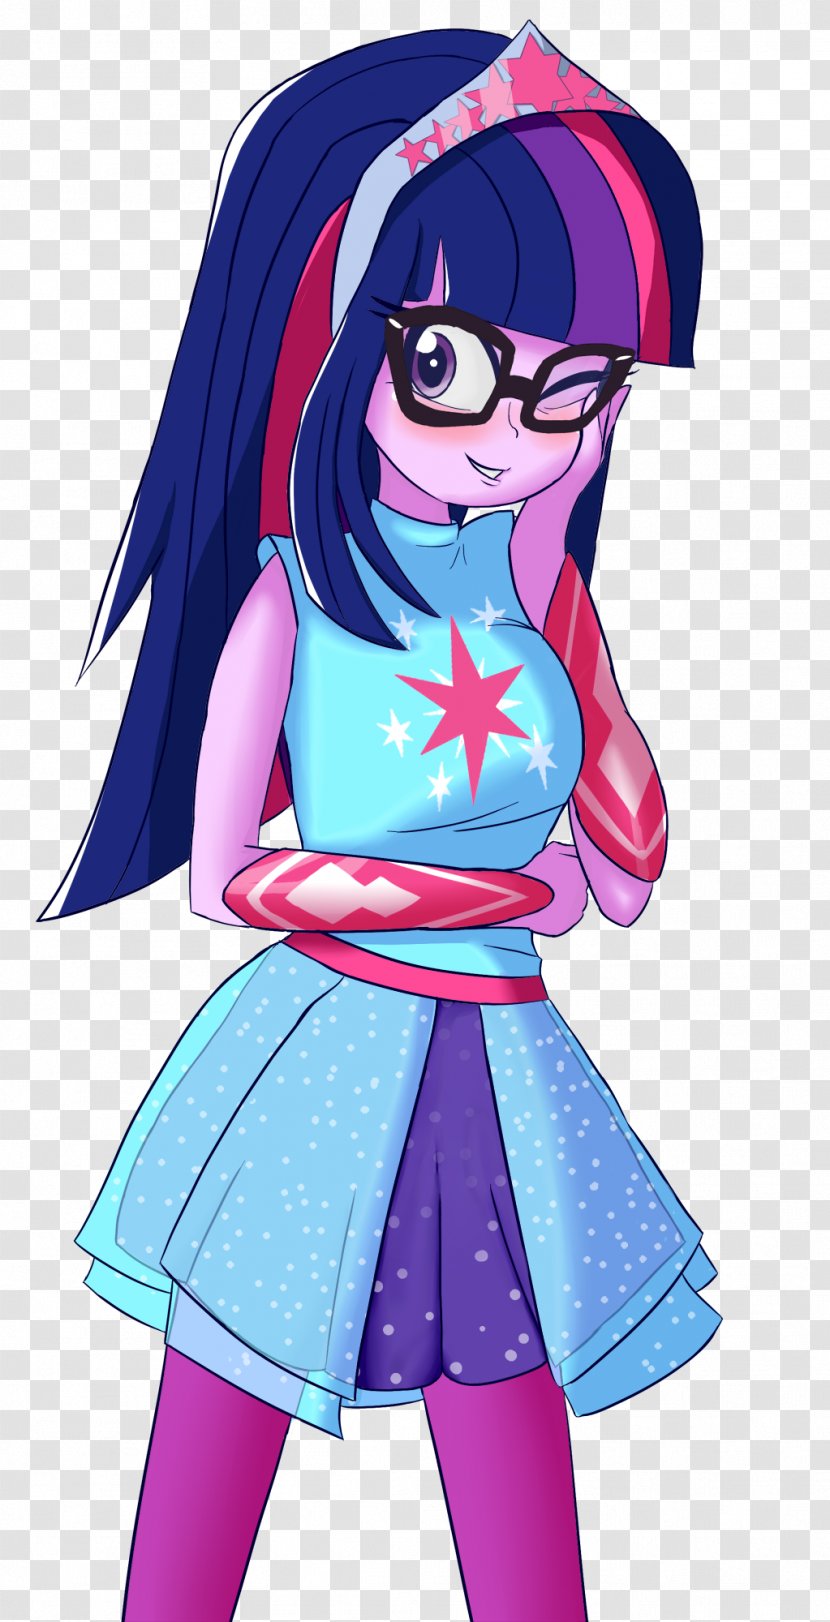 Twilight Sparkle Rarity My Little Pony: Equestria Girls - Silhouette Transparent PNG